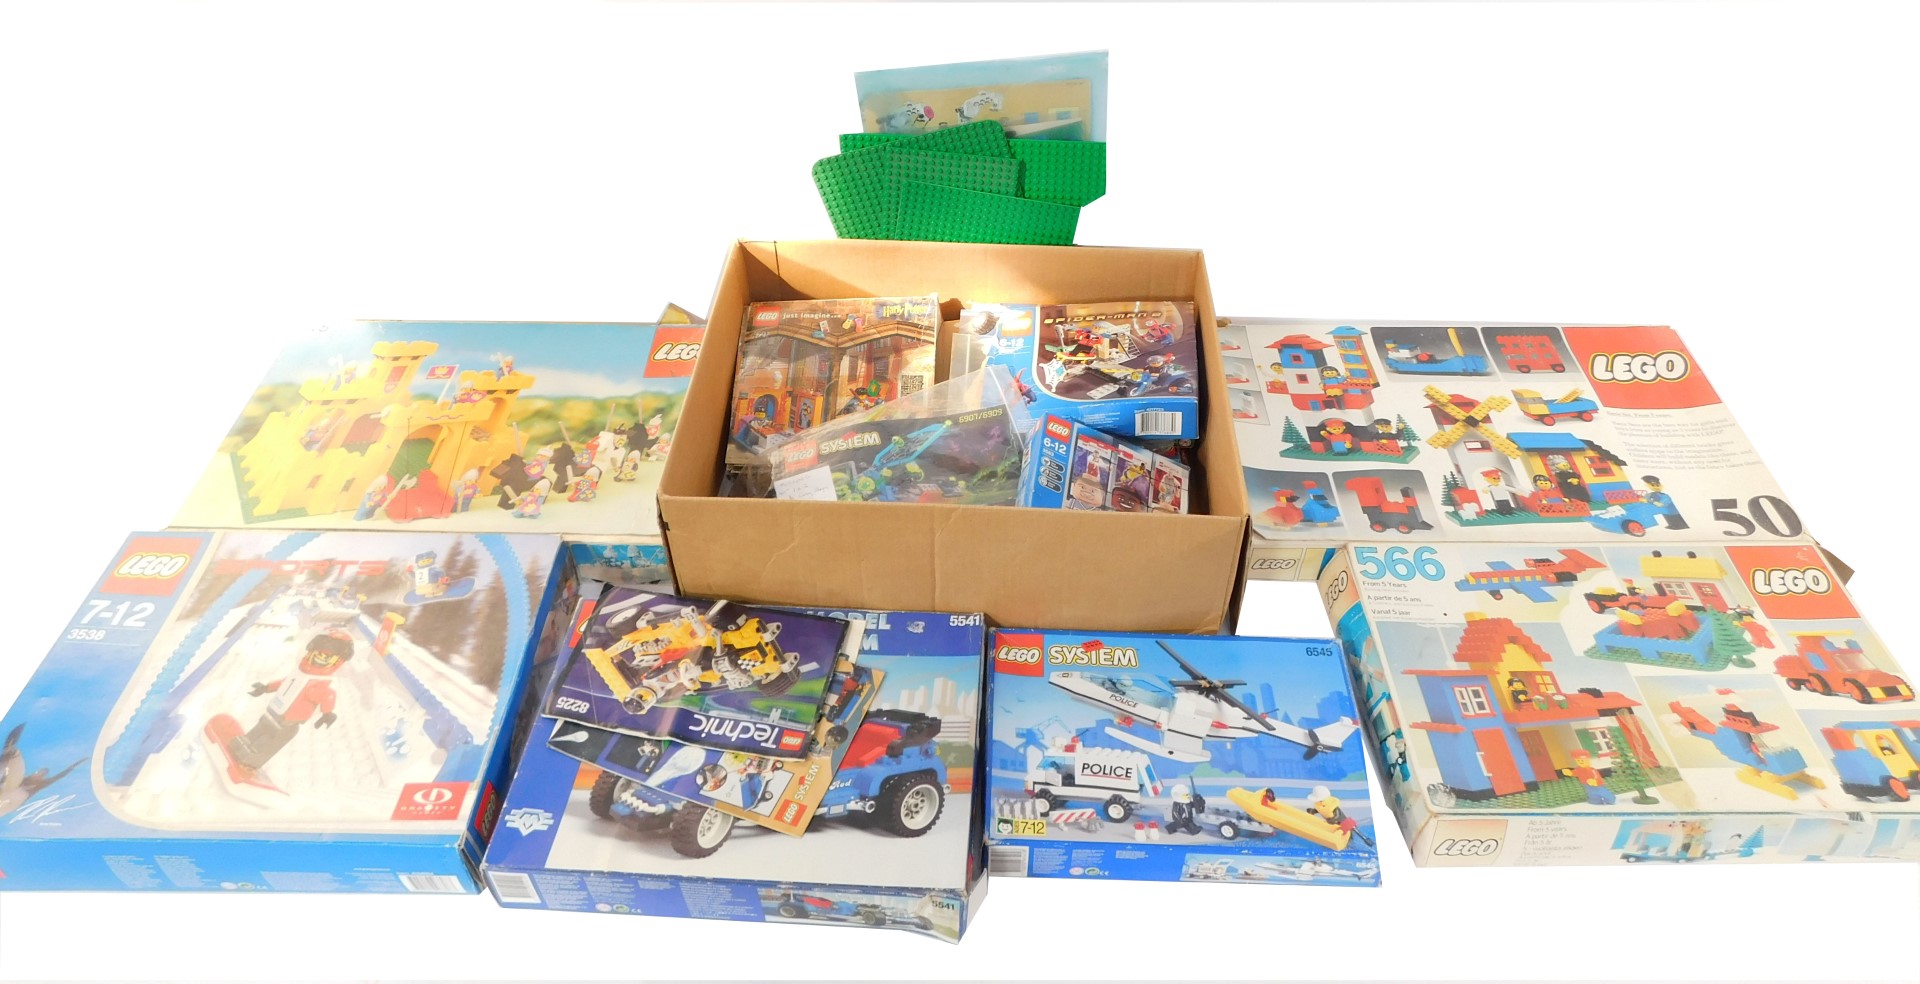 Lego boxed sets, unchecked, comprising sports 3538, system police set 6545, model team 5541 and buil